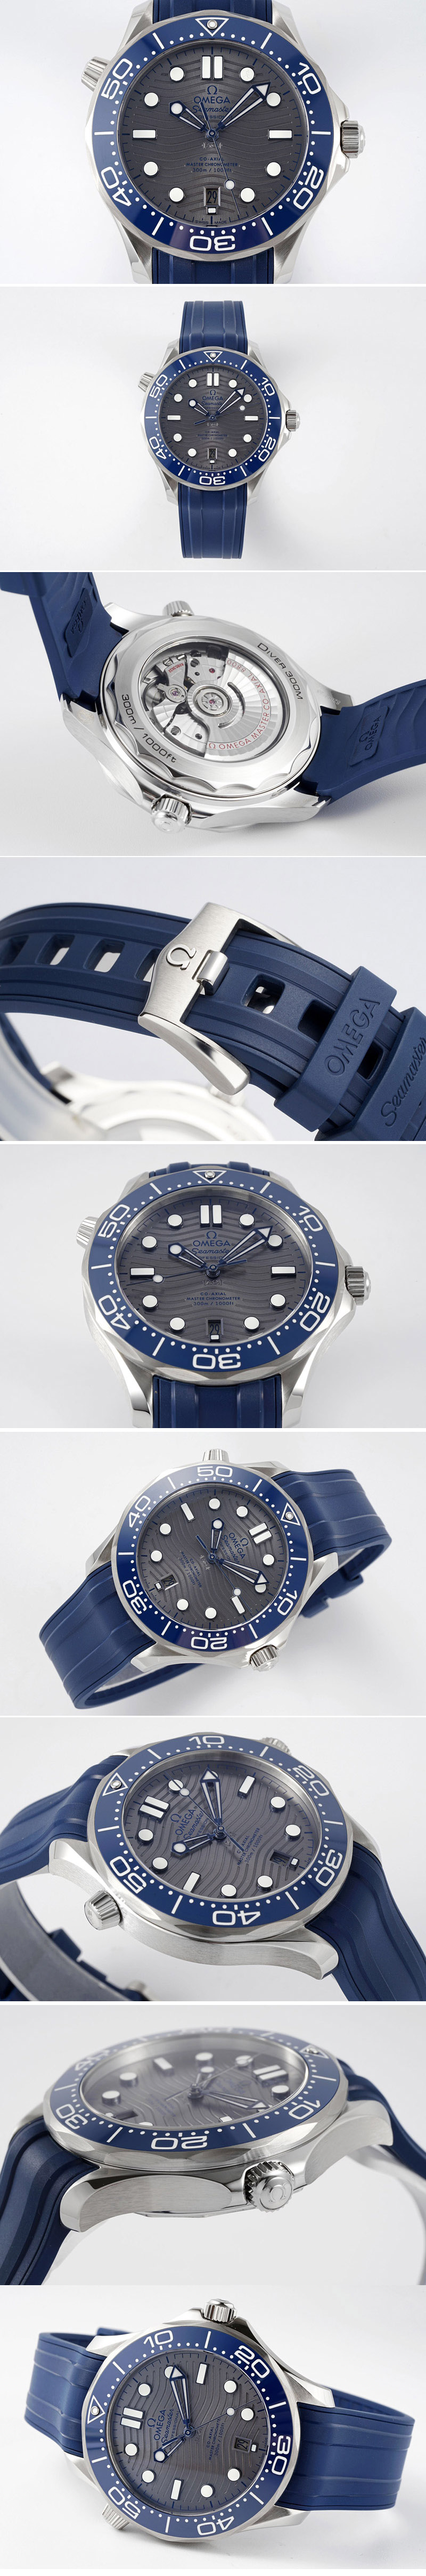 Replica Omega Seamaster Diver 300M ZF 1:1 Best Edition Blue Ceramic Gray Dial on Blue Rubber Strap